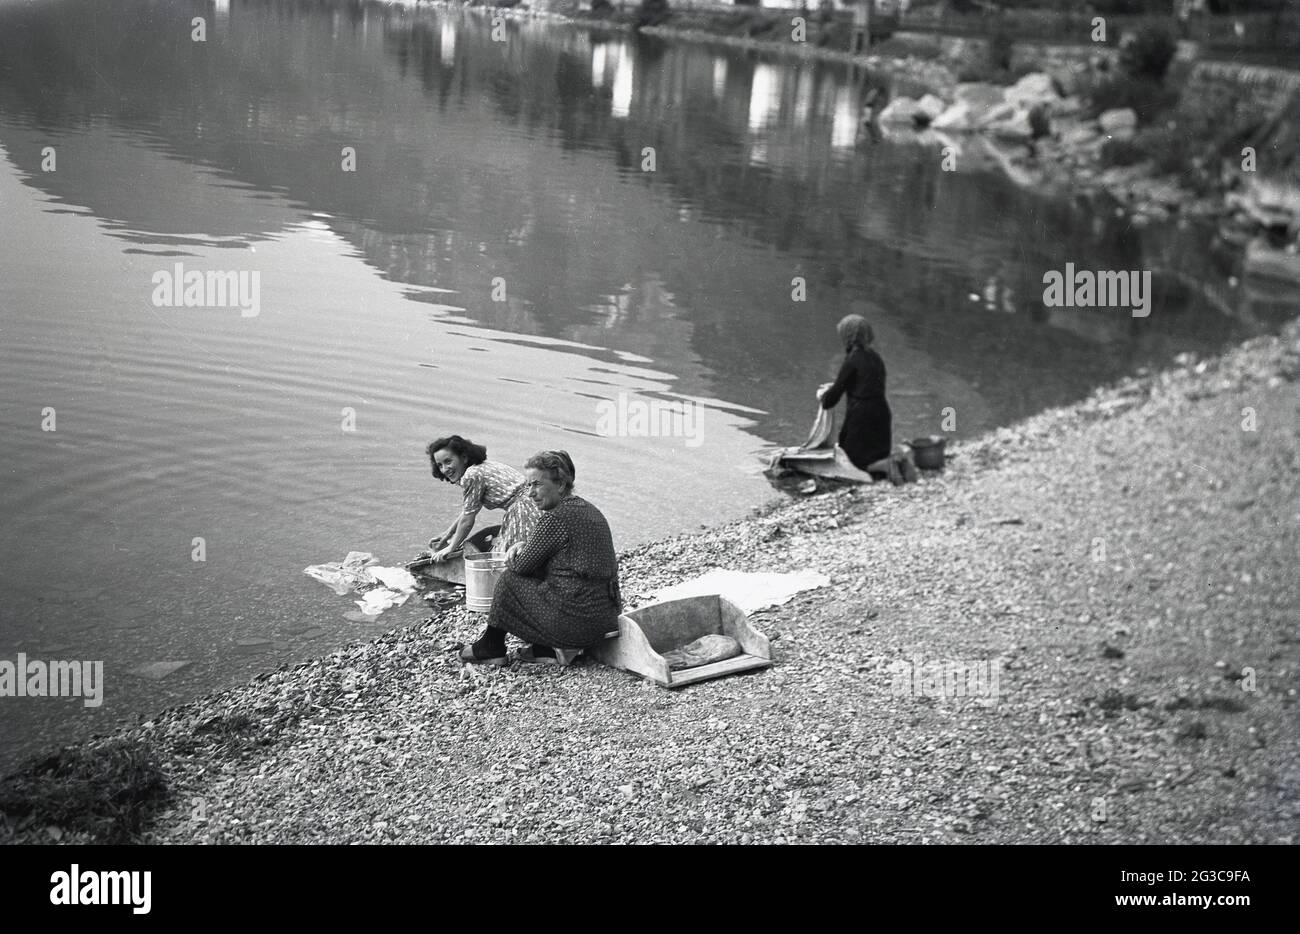 1950, two women on a shore by a lake hand washing garments using a form of washboard, a wooden washing box and board, France. This three-sided wooden box or caisse had a back half with a place to kneel on and front half (or washboard) where the clothes would be scrubbed or washed with the water. The woman knelt in the box and her skirt stayed dry. For more comfort, it would be padded with straw or a cushion as seen here. In some areas of the world, doing the laundry by a local river or lake, a tiring yet effective method, is still practised today. Stock Photo